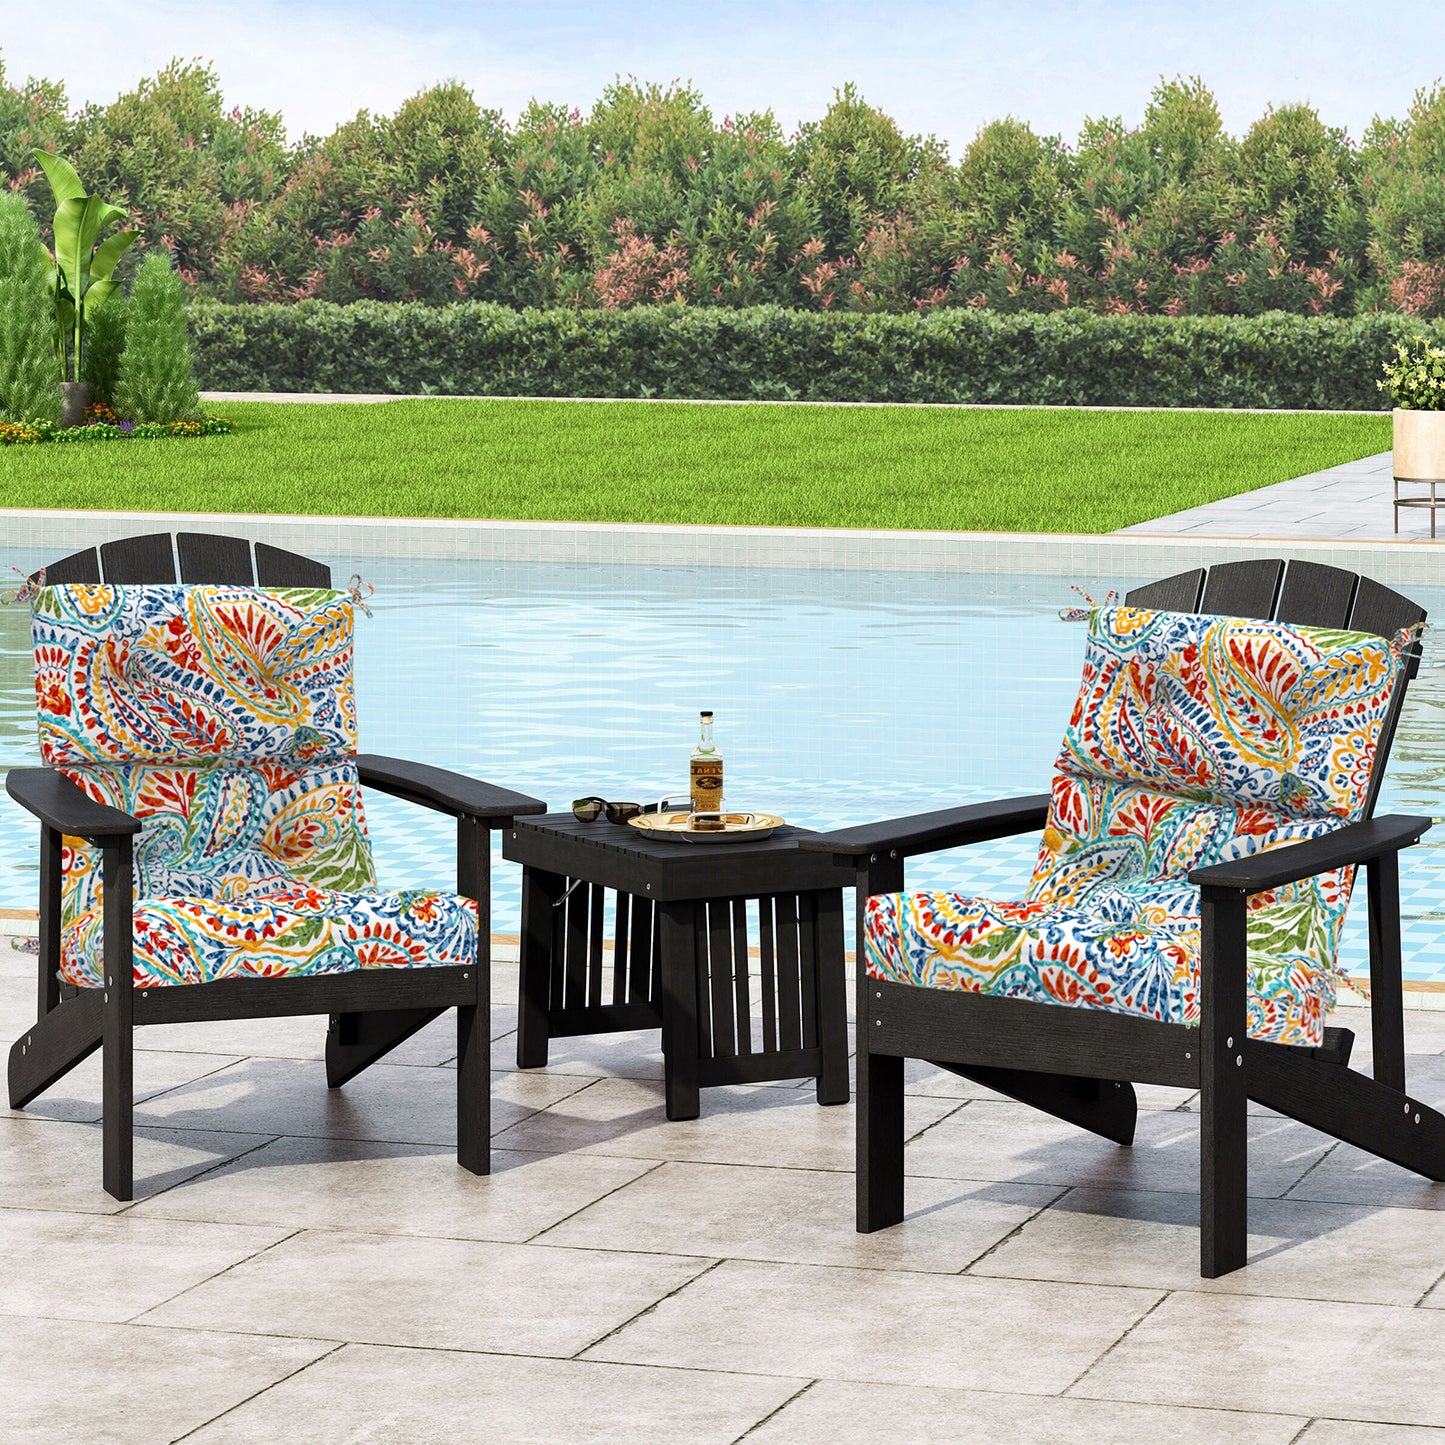 Melody Elephant Outdoor Tufted High Back Chair Cushions, Water Resistant Rocking Seat Chair Cushions 2 Pack, Adirondack Cushions for Patio Home Garden, 22" W x 20" D, Paisley Multi